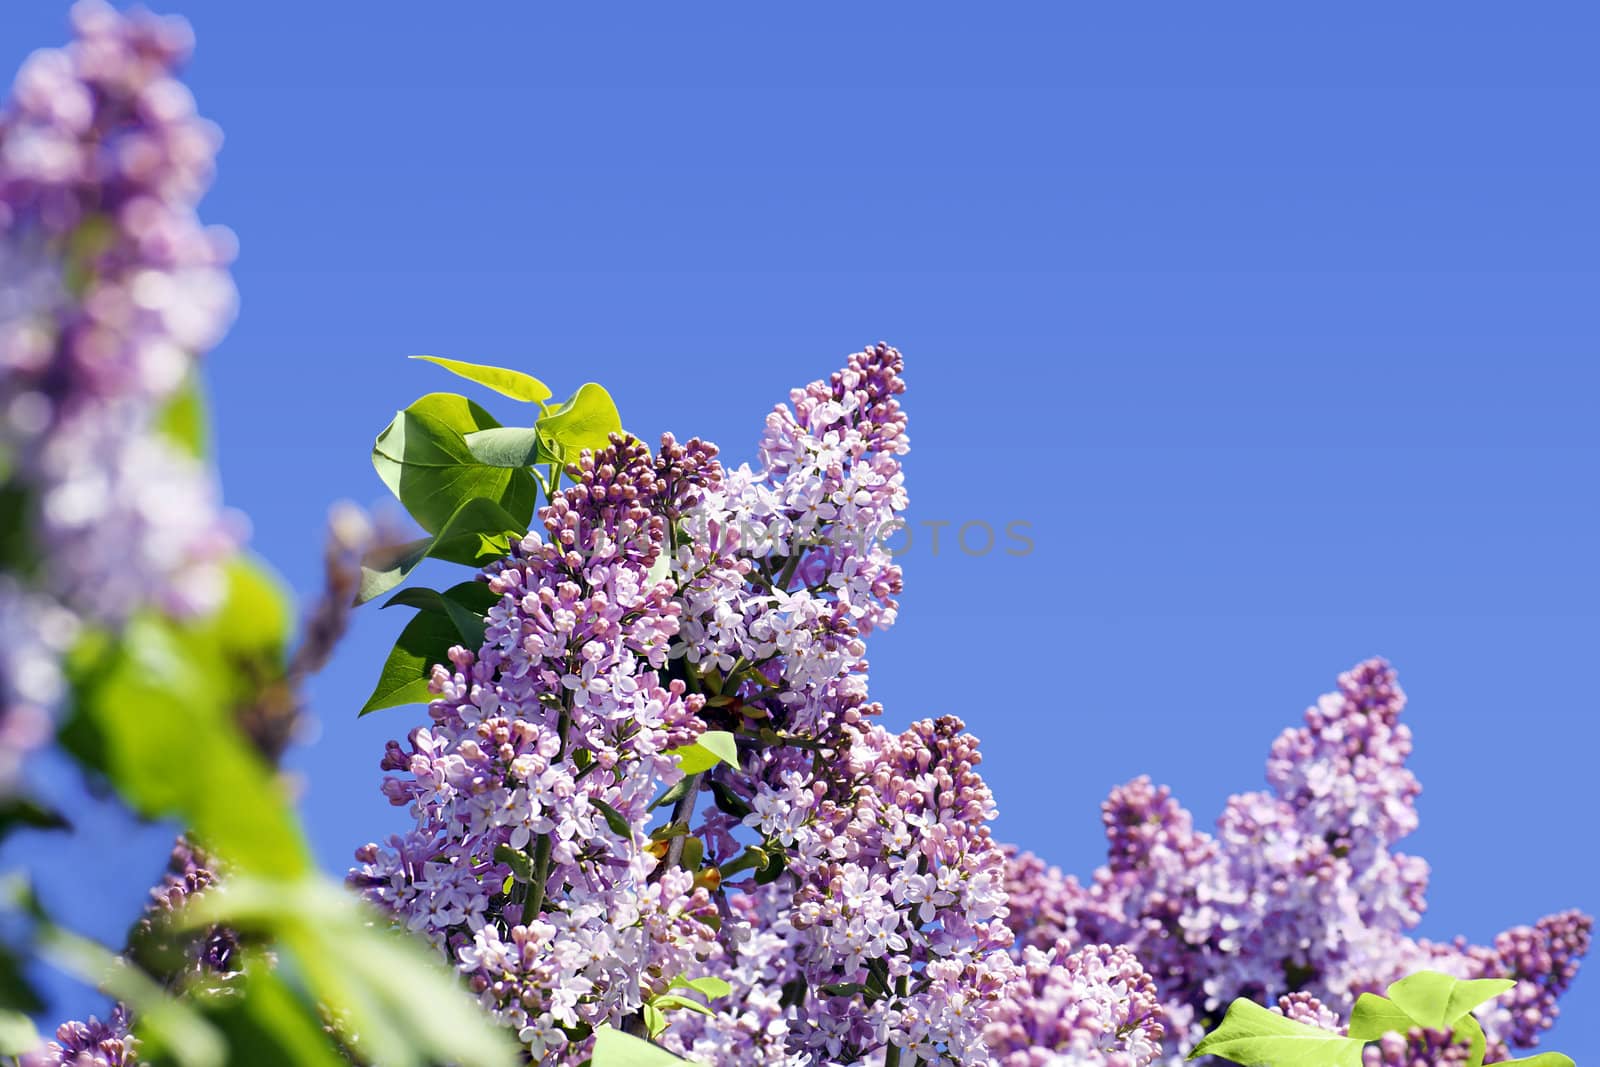 Lilac bush over bright blue sky by Mirage3